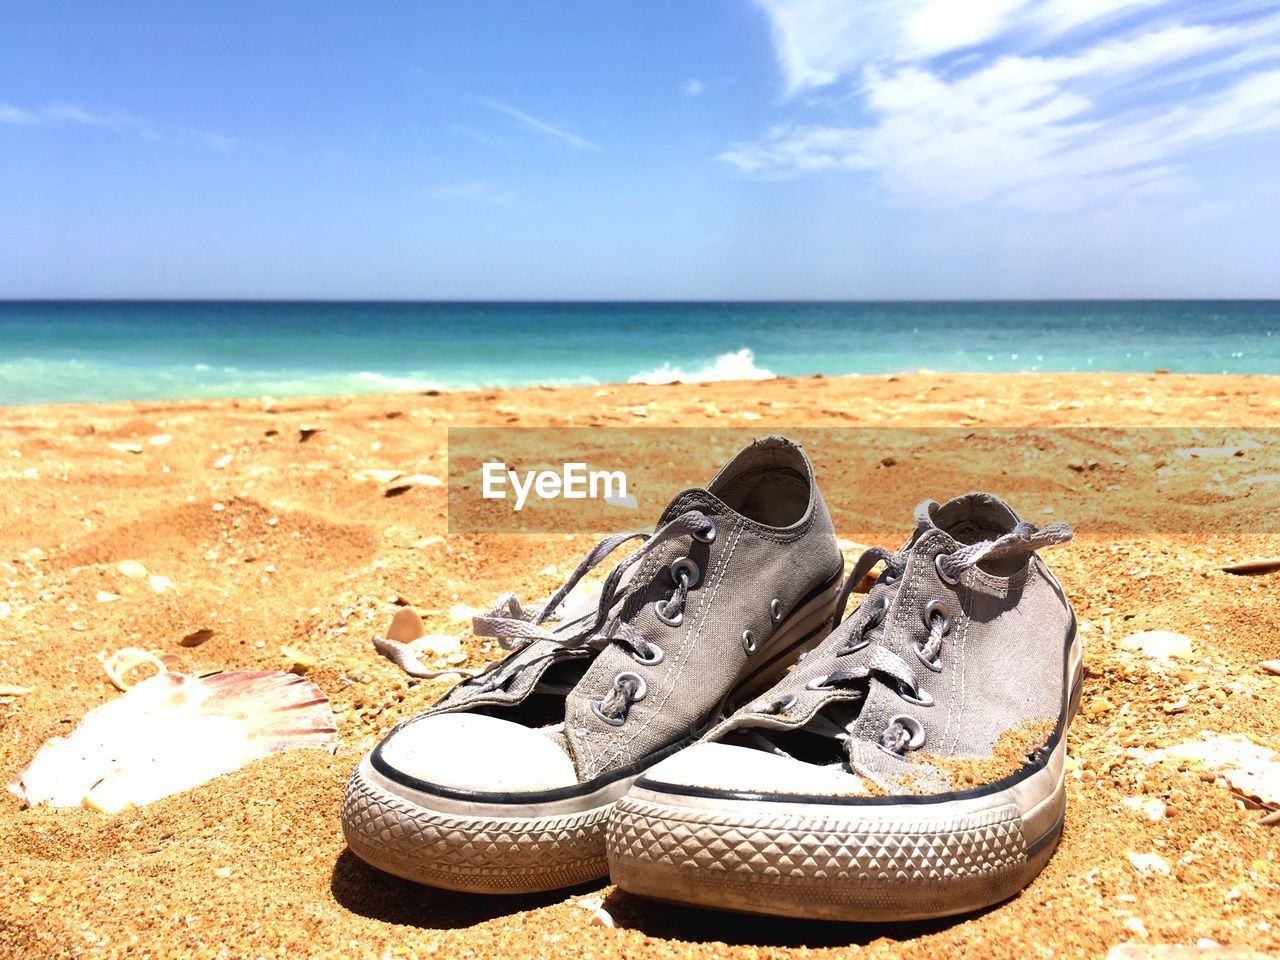 Shoes in the sand